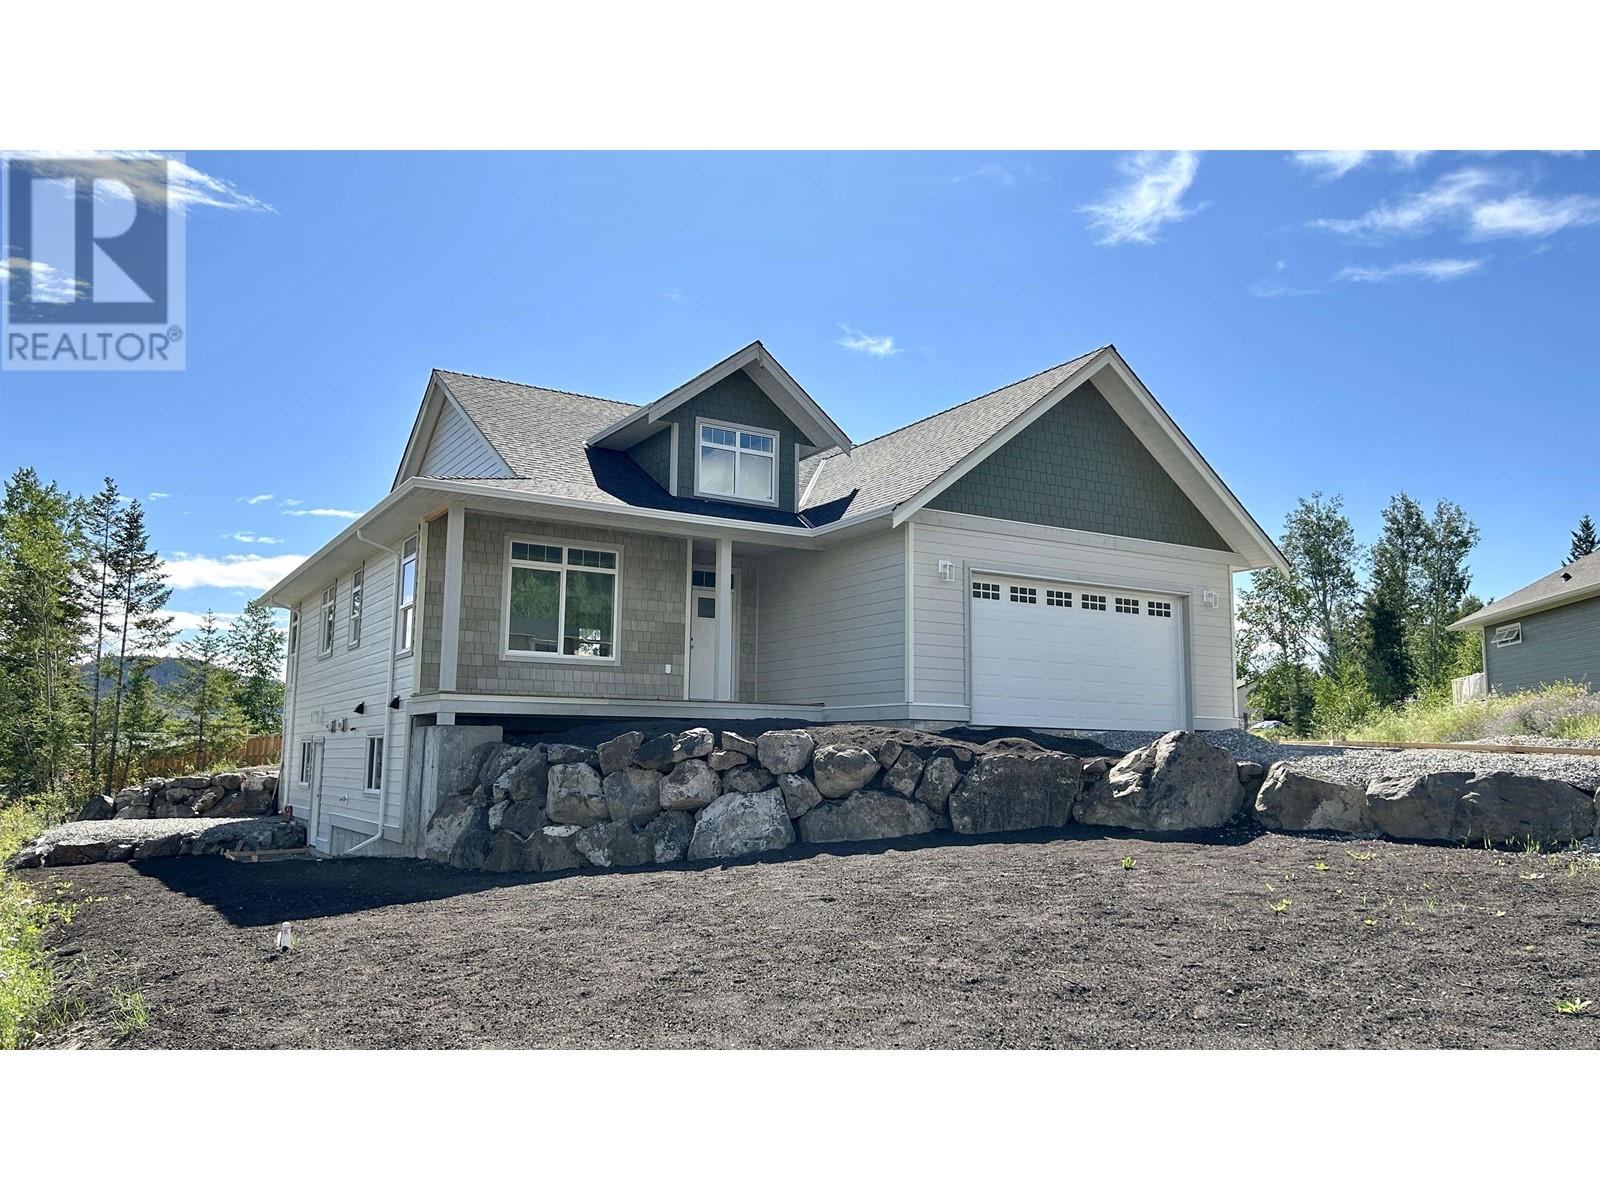 902 SPRUCE PLACE, 100 mile house, British Columbia